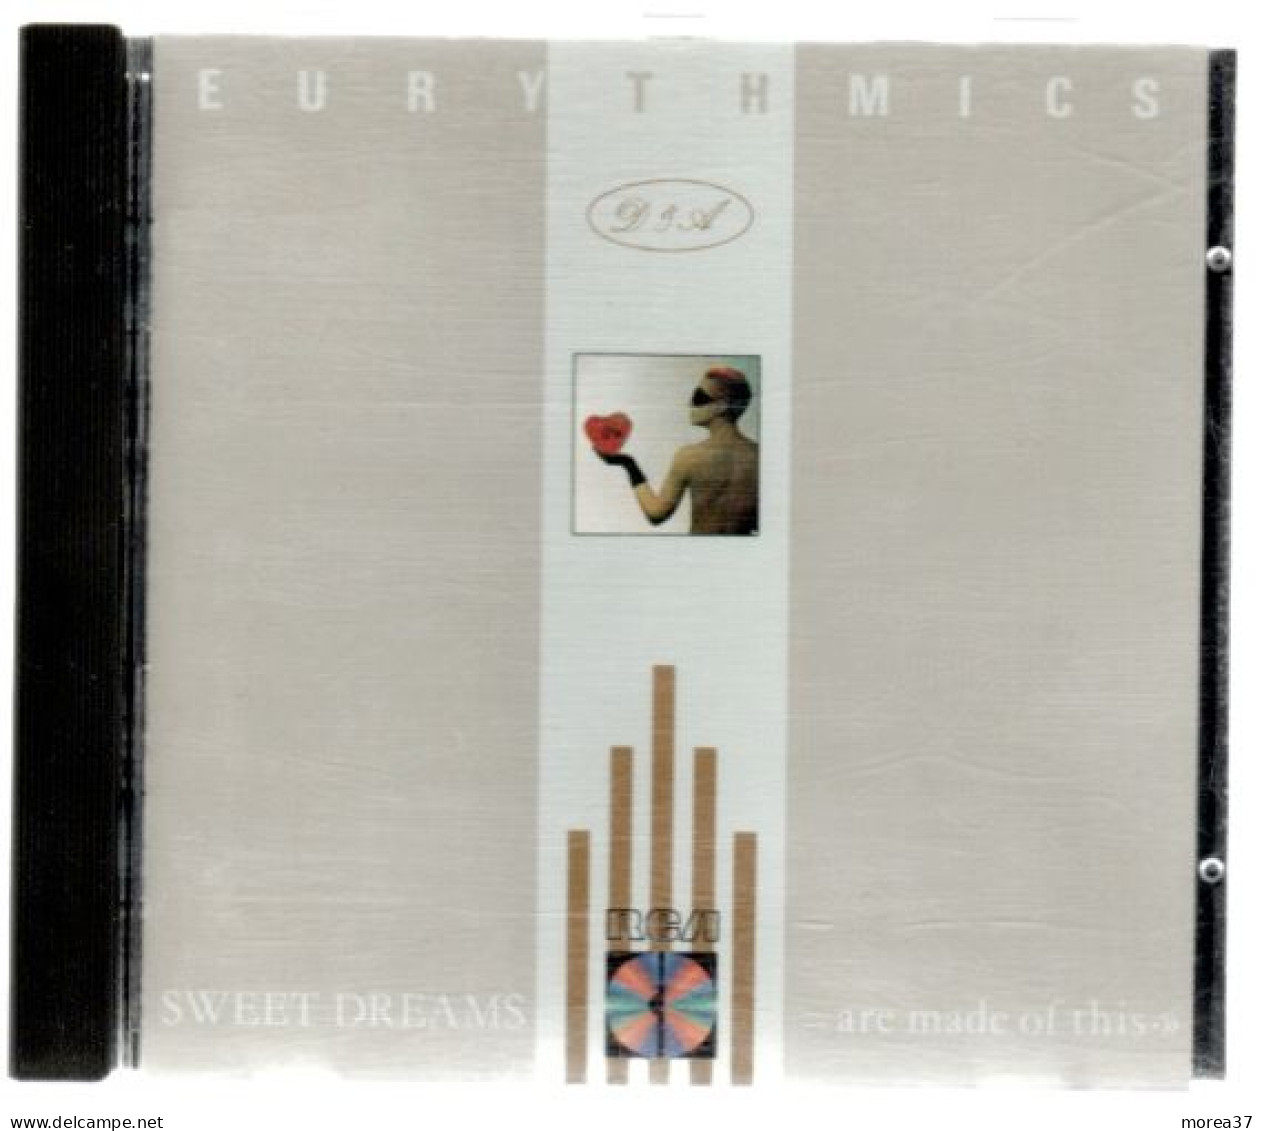 EURYTHMICS  Sweet Dreams Are Made Of This    (CD 03) - Other - English Music